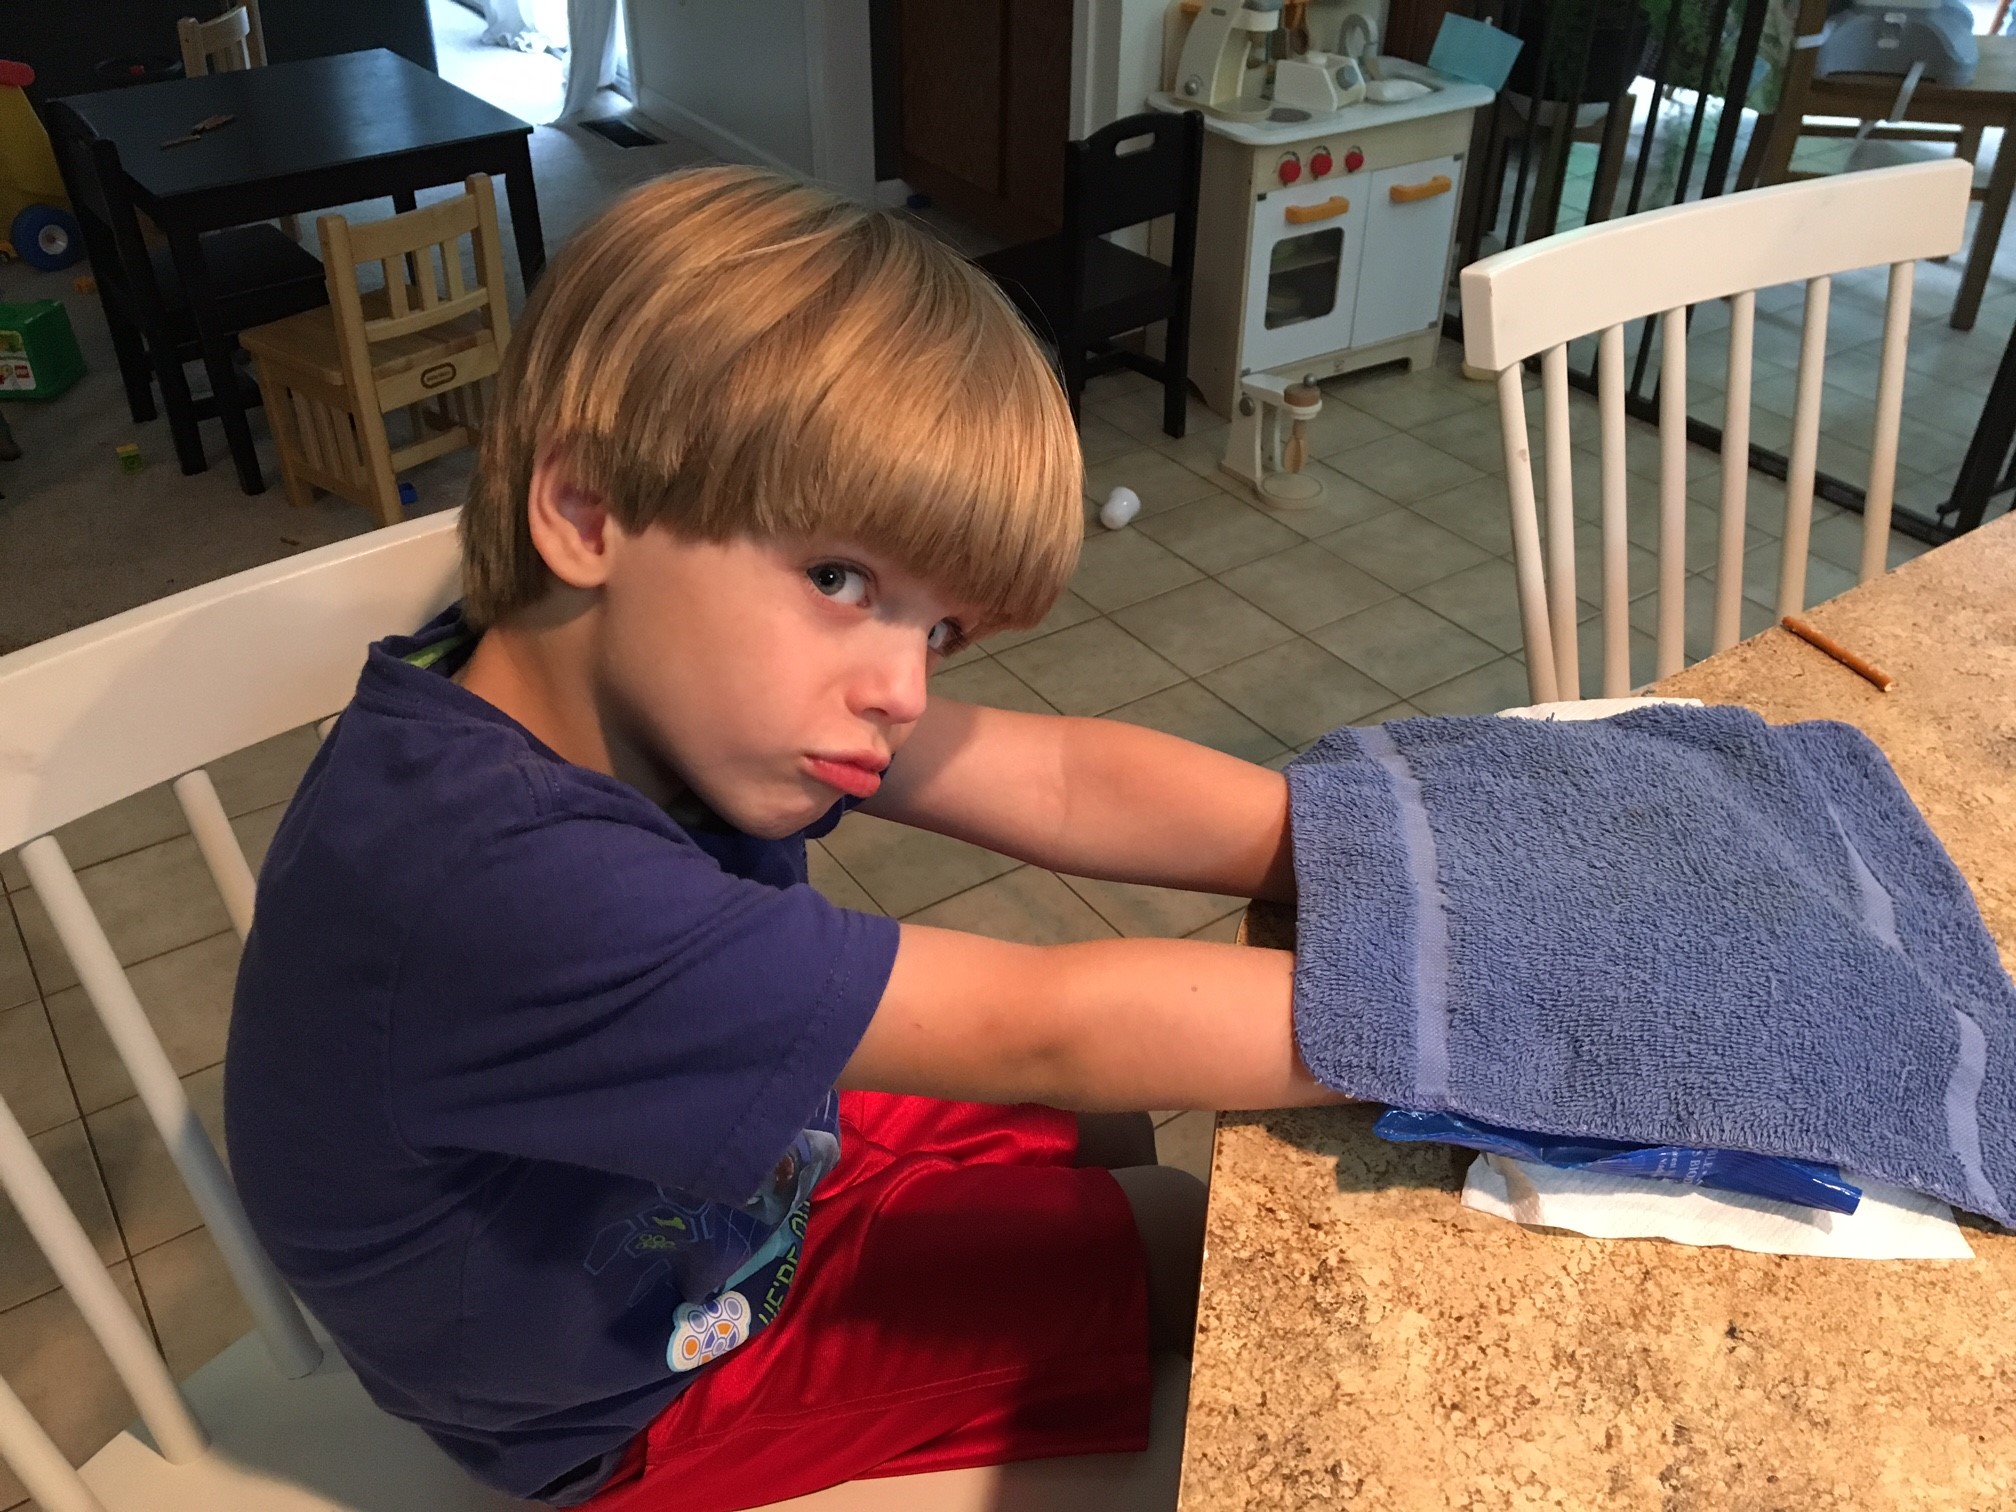 Boy putting his hands on a Soft Ice Cold/Hot therapy pack